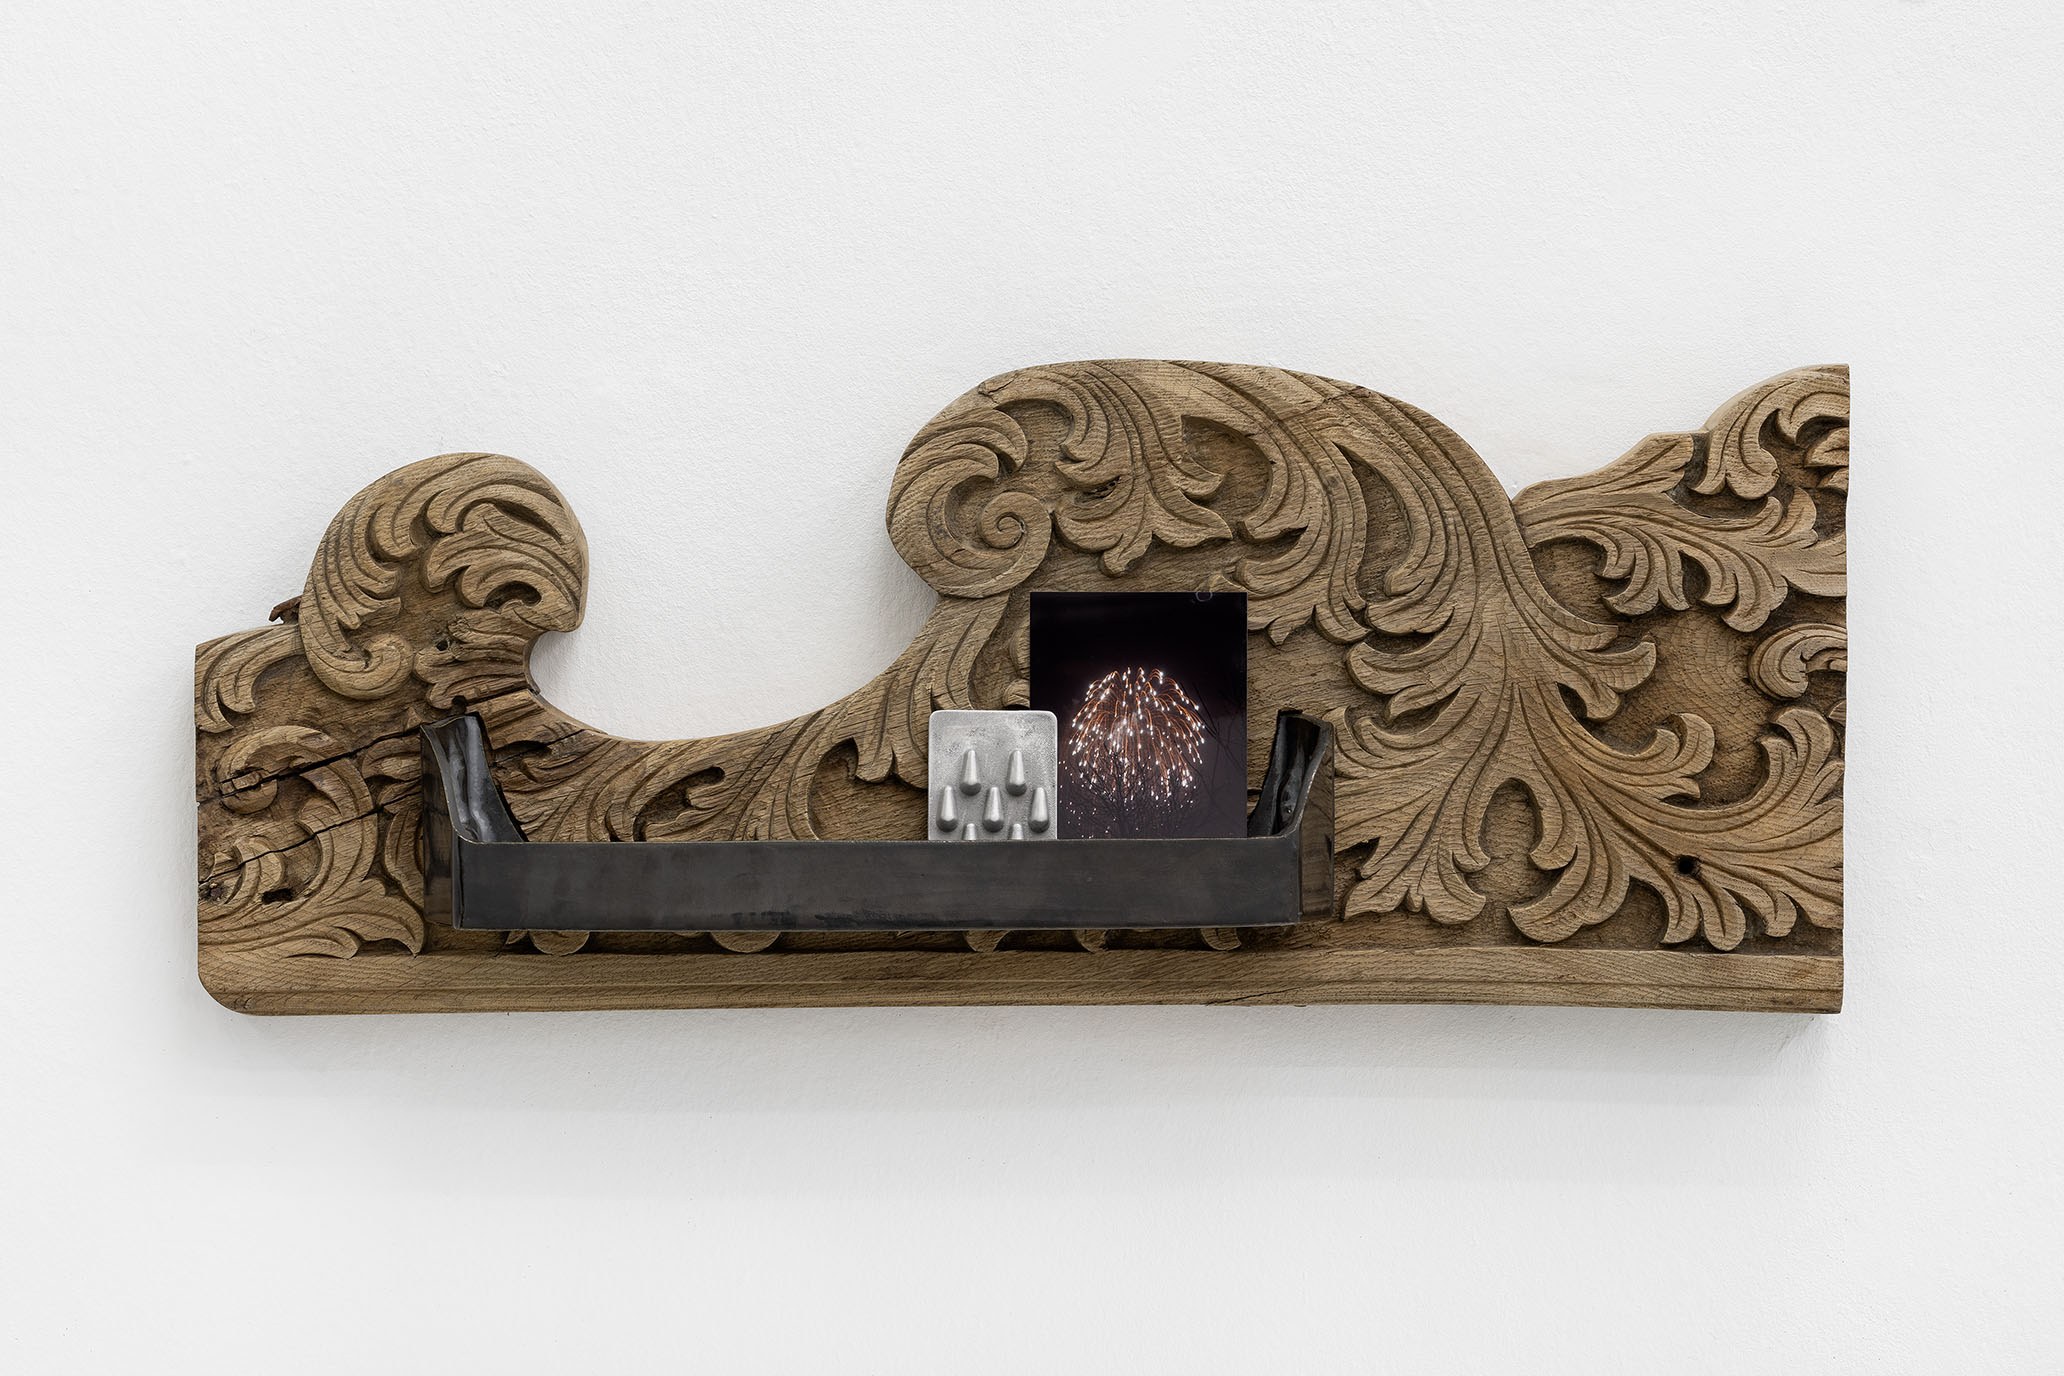 Monika GRABUSCHNIGG Compartment (Weeping Willow), 2024  Wood, glazed ceramic, casted aluminum, photo print and magnets 30 x 78 x 16 cm  Courtesy the artist, Carbon 12 and KOENIG2 by_robbygreif, Vienna 